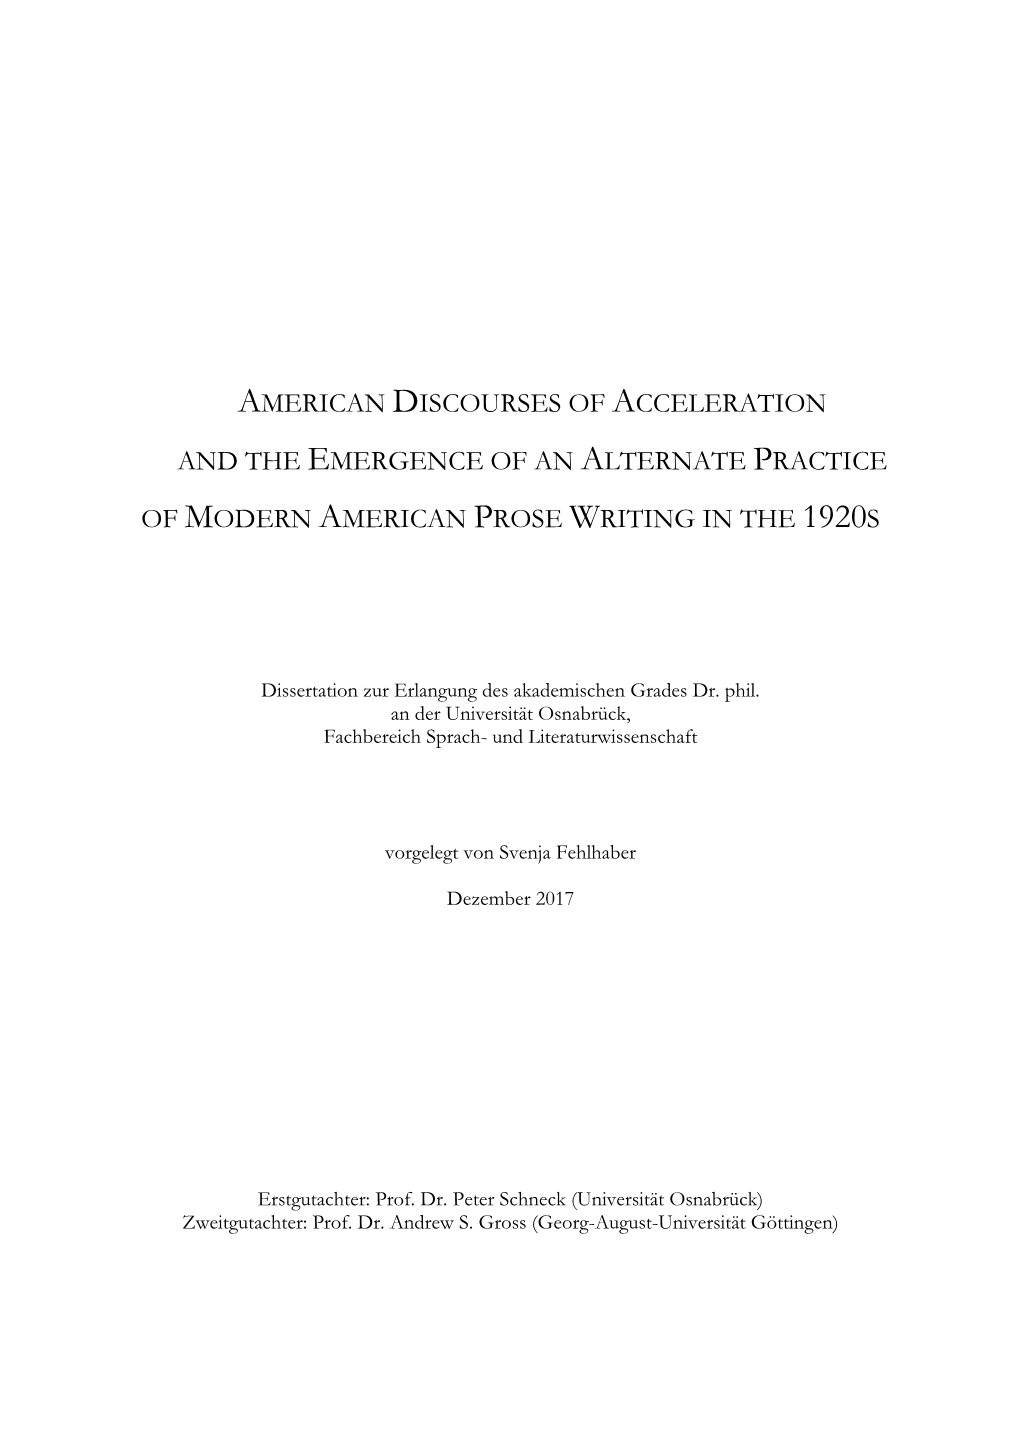 American Discourses of Acceleration and the Emergence of an Alternate Practice of Modern American Prose Writing in the 1920S